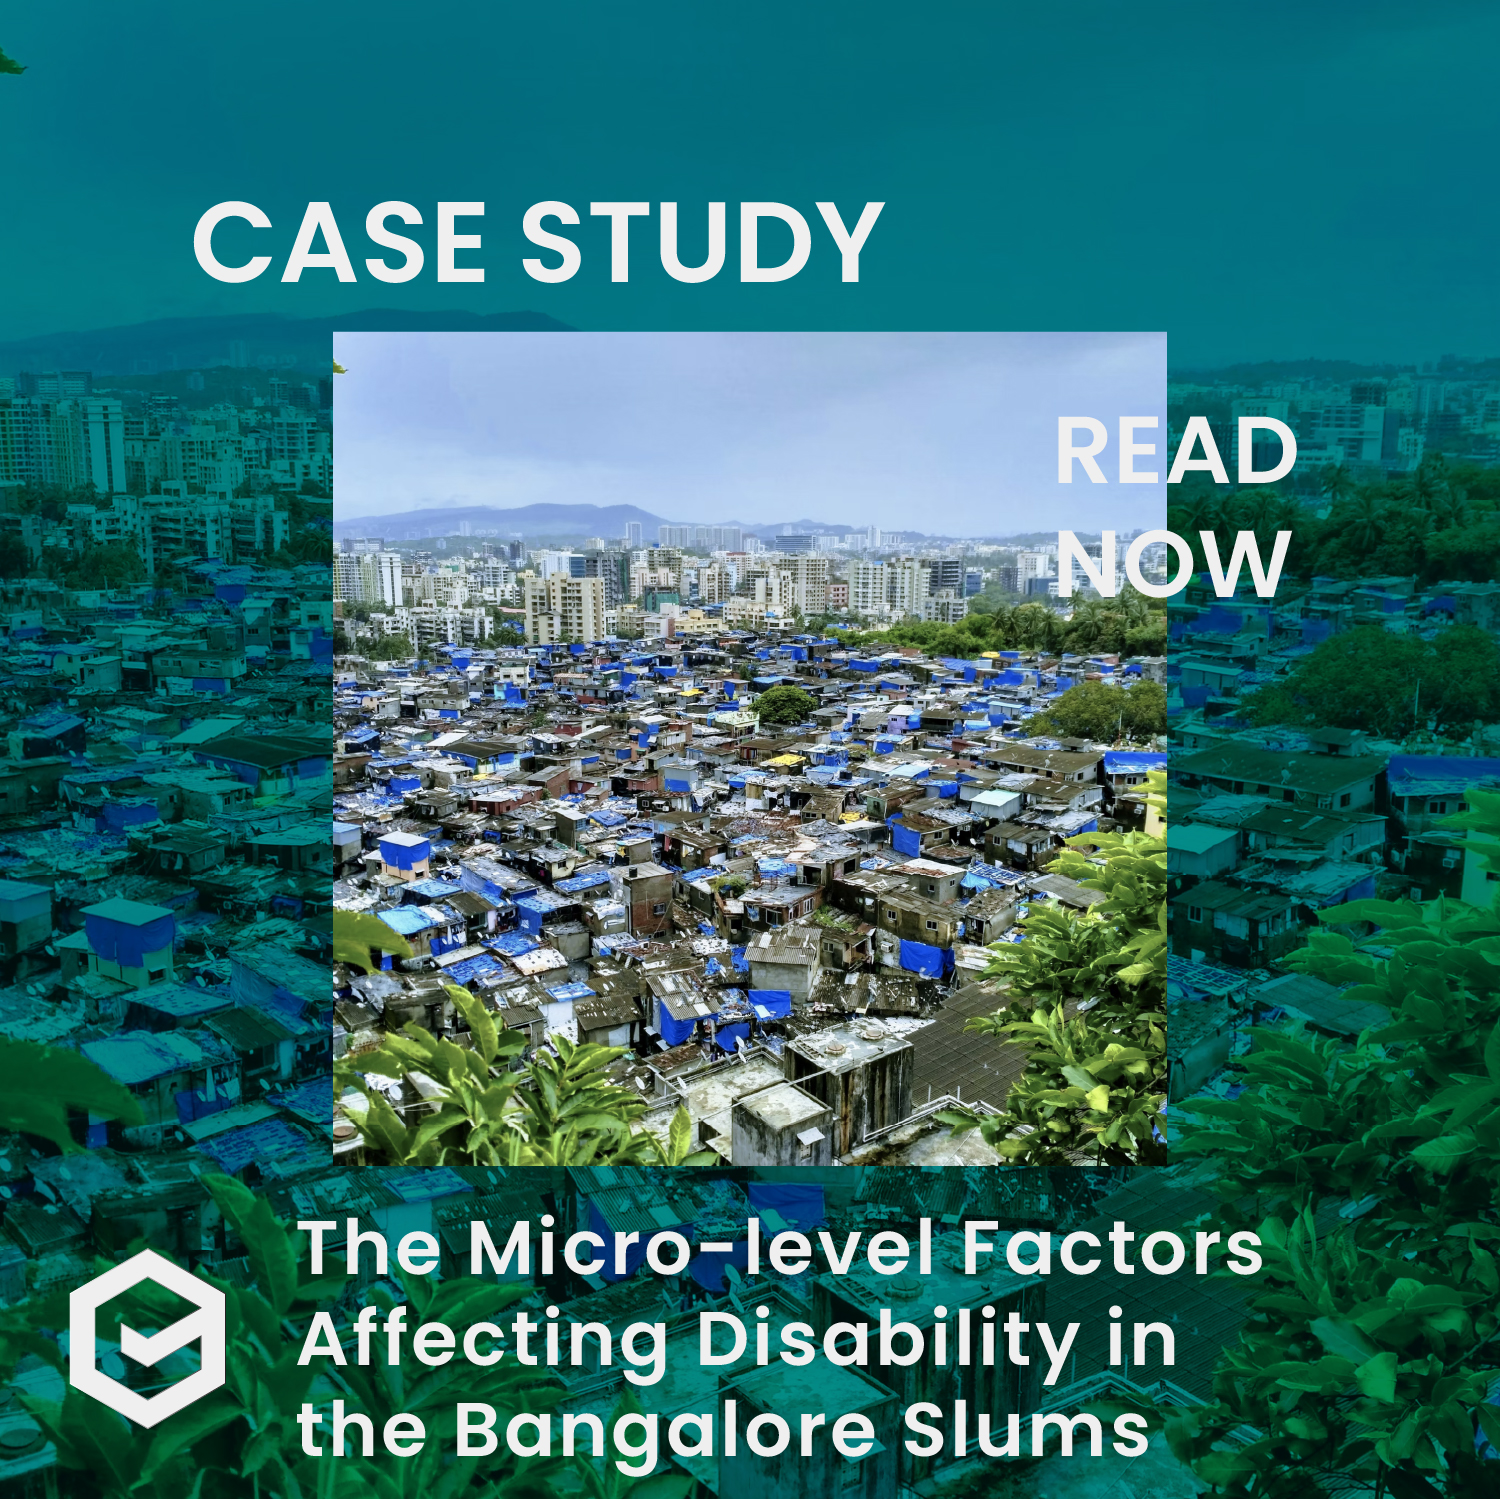 The Micro-level Factors Affecting Disabilities in the Bangalore Slums